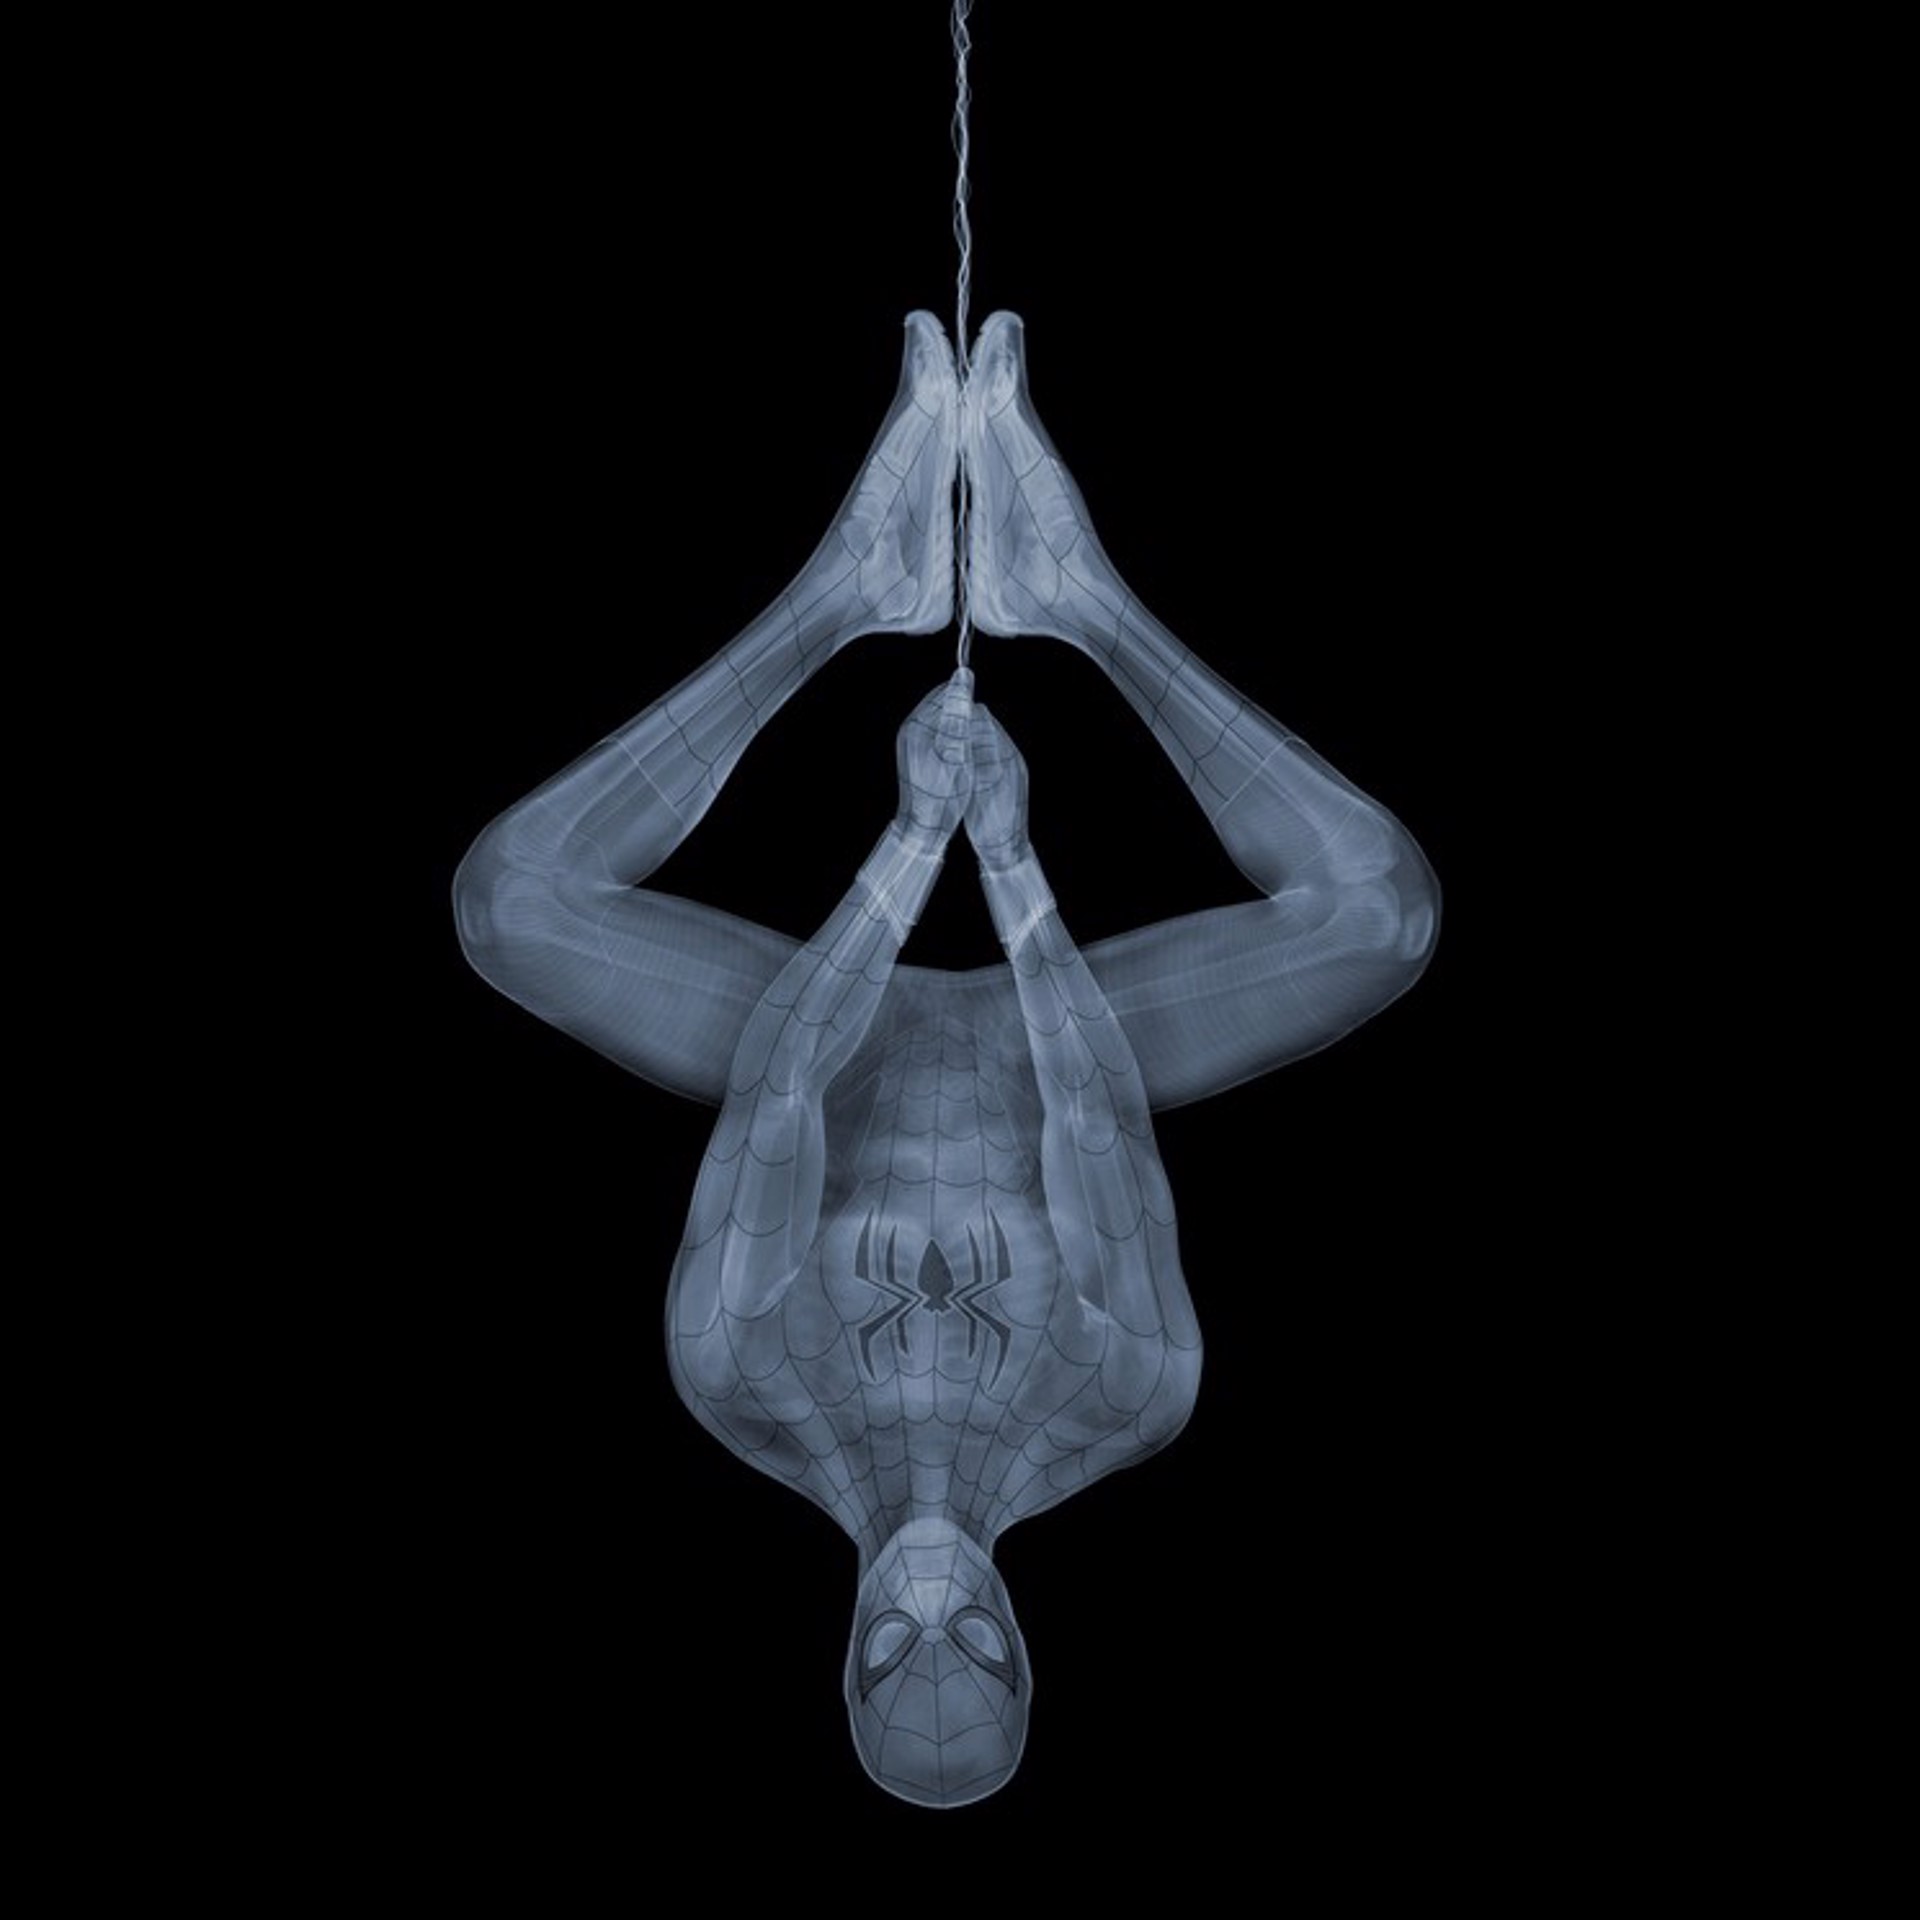 Spiderman by Nick Veasey